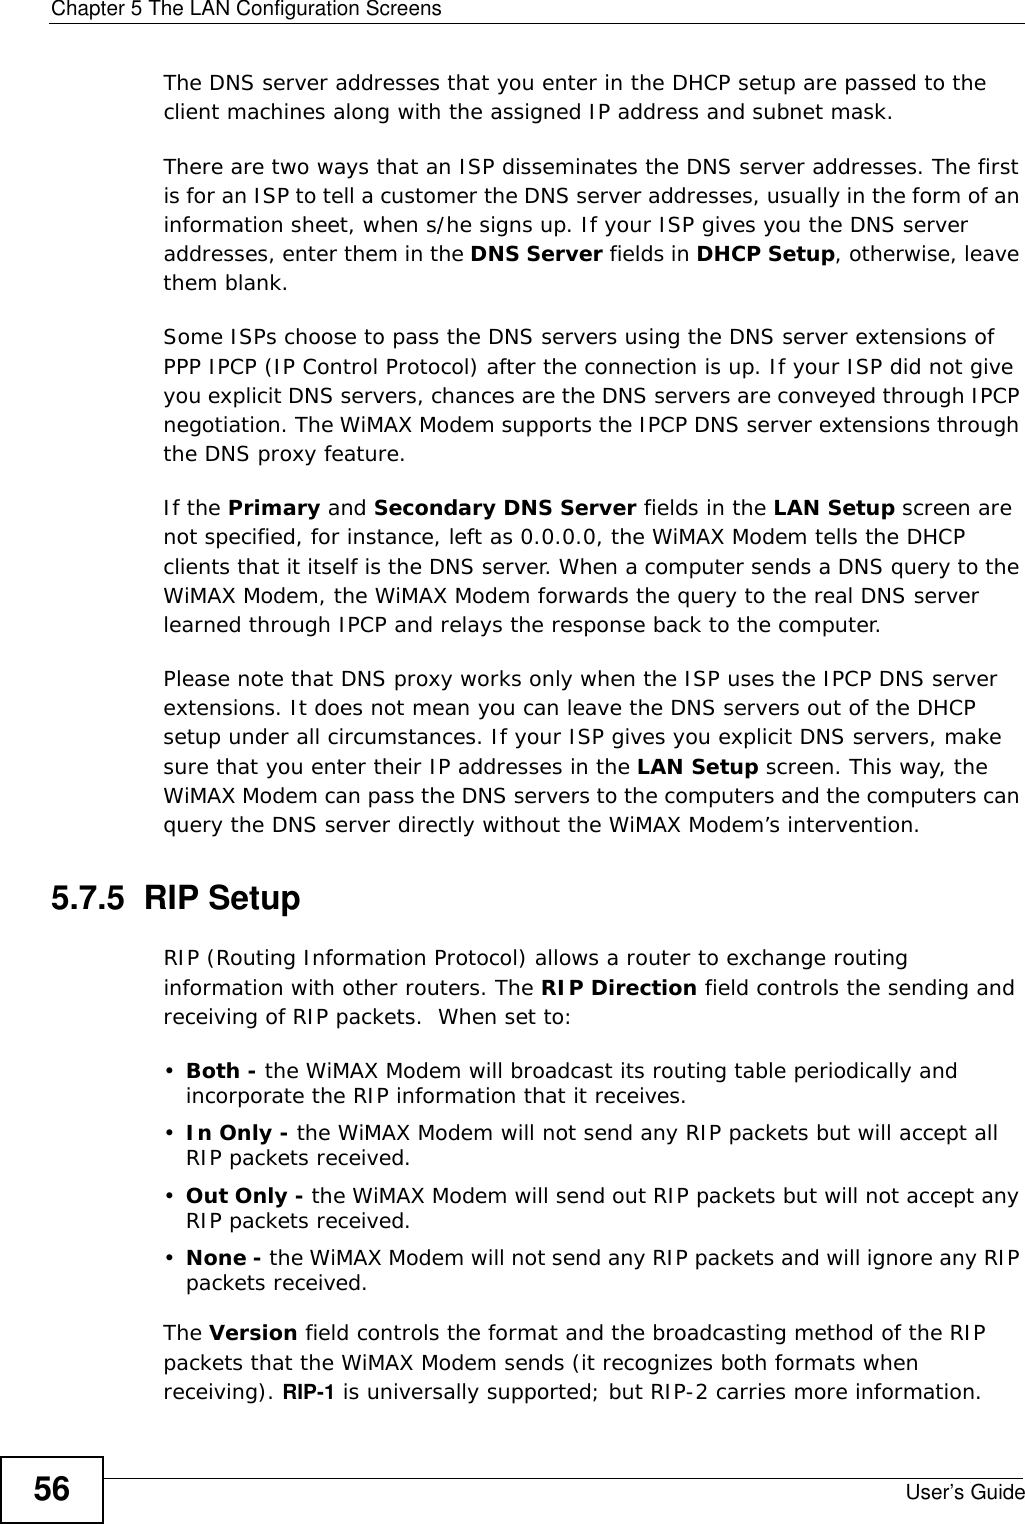 Chapter 5 The LAN Configuration ScreensUser’s Guide56The DNS server addresses that you enter in the DHCP setup are passed to the client machines along with the assigned IP address and subnet mask.There are two ways that an ISP disseminates the DNS server addresses. The first is for an ISP to tell a customer the DNS server addresses, usually in the form of an information sheet, when s/he signs up. If your ISP gives you the DNS server addresses, enter them in the DNS Server fields in DHCP Setup, otherwise, leave them blank.Some ISPs choose to pass the DNS servers using the DNS server extensions of PPP IPCP (IP Control Protocol) after the connection is up. If your ISP did not give you explicit DNS servers, chances are the DNS servers are conveyed through IPCP negotiation. The WiMAX Modem supports the IPCP DNS server extensions through the DNS proxy feature.If the Primary and Secondary DNS Server fields in the LAN Setup screen are not specified, for instance, left as 0.0.0.0, the WiMAX Modem tells the DHCP clients that it itself is the DNS server. When a computer sends a DNS query to the WiMAX Modem, the WiMAX Modem forwards the query to the real DNS server learned through IPCP and relays the response back to the computer.Please note that DNS proxy works only when the ISP uses the IPCP DNS server extensions. It does not mean you can leave the DNS servers out of the DHCP setup under all circumstances. If your ISP gives you explicit DNS servers, make sure that you enter their IP addresses in the LAN Setup screen. This way, the WiMAX Modem can pass the DNS servers to the computers and the computers can query the DNS server directly without the WiMAX Modem’s intervention.5.7.5  RIP SetupRIP (Routing Information Protocol) allows a router to exchange routing information with other routers. The RIP Direction field controls the sending and receiving of RIP packets.  When set to:•Both - the WiMAX Modem will broadcast its routing table periodically and incorporate the RIP information that it receives.•In Only - the WiMAX Modem will not send any RIP packets but will accept all RIP packets received.•Out Only - the WiMAX Modem will send out RIP packets but will not accept any RIP packets received.•None - the WiMAX Modem will not send any RIP packets and will ignore any RIP packets received.The Version field controls the format and the broadcasting method of the RIP packets that the WiMAX Modem sends (it recognizes both formats when receiving). RIP-1 is universally supported; but RIP-2 carries more information. 